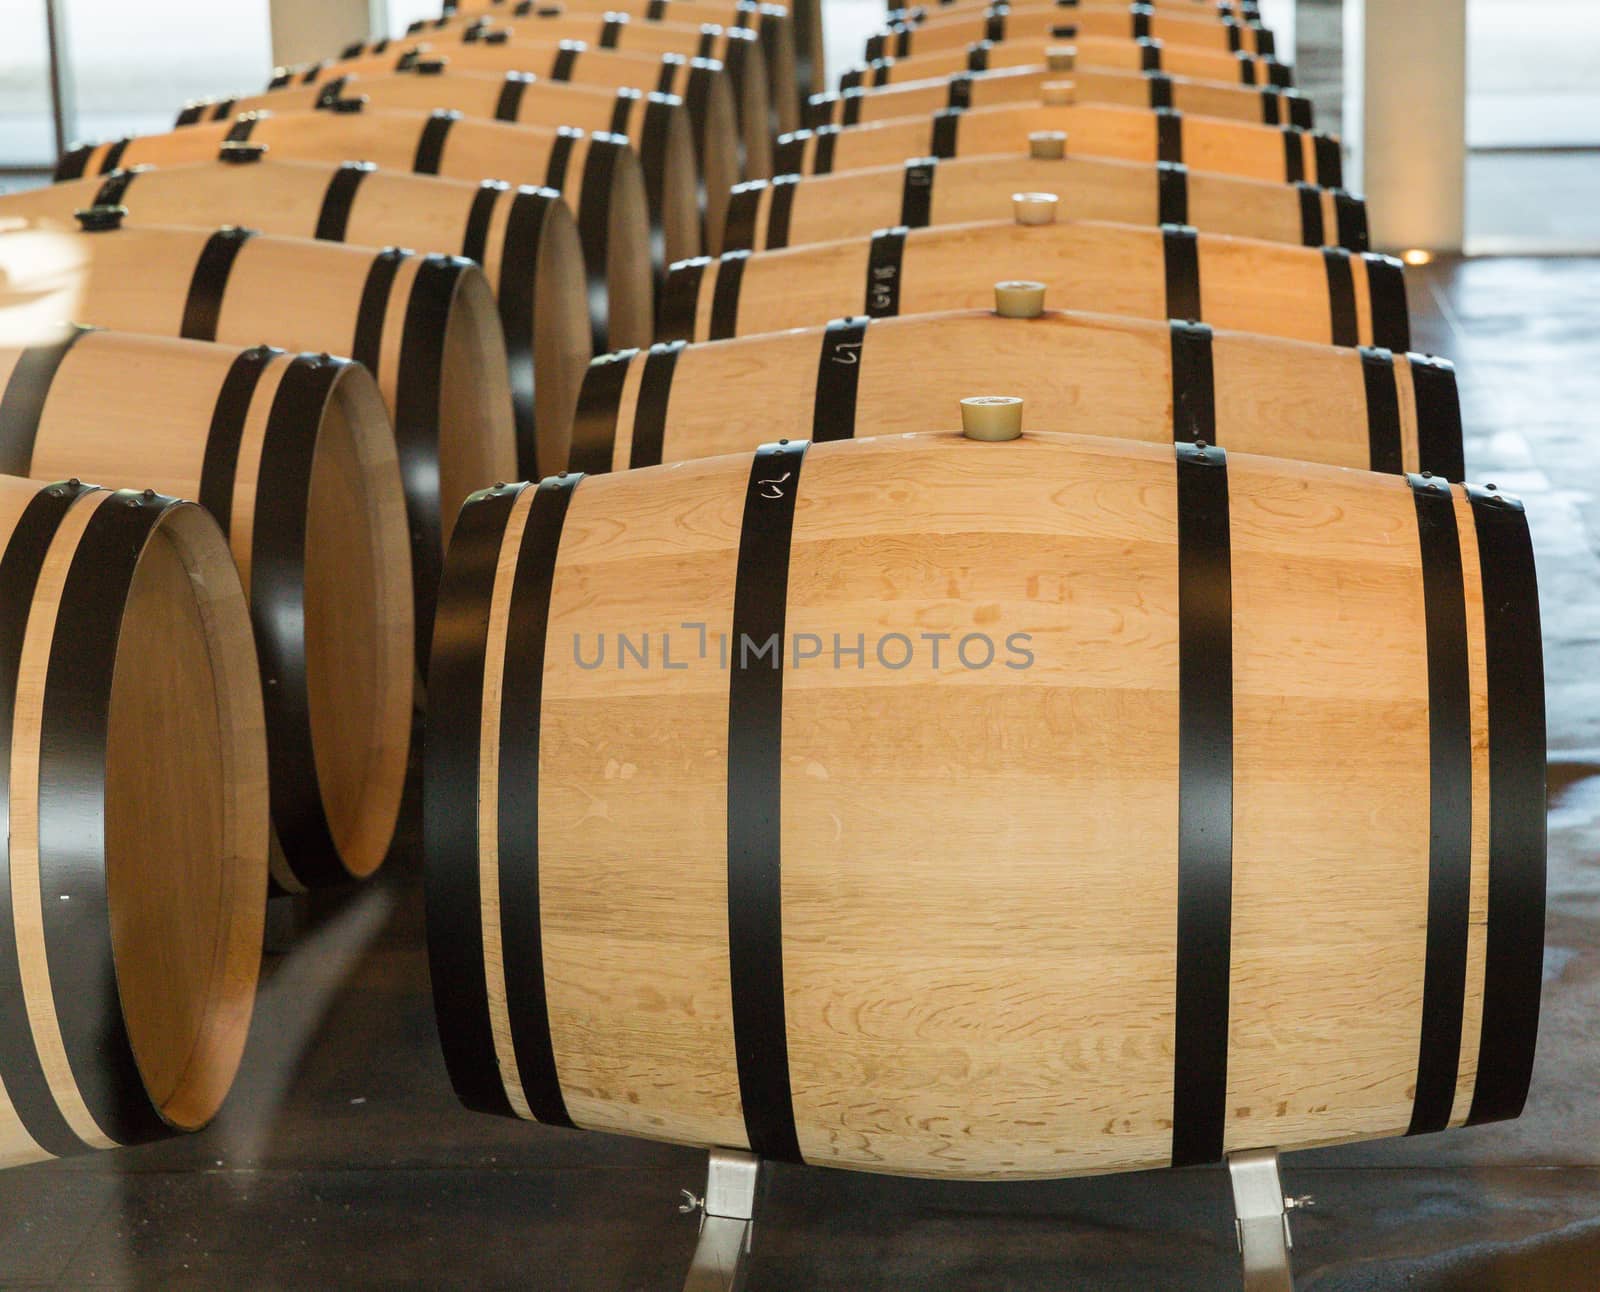 Wine barrels, especially those made of oak, have long been used as containers in which wine is aged. Aging in oak typically imparts desirable vanilla, butter and spice flavors to wine. The size of the barrel plays a large role in determining the effects of oak on the wine by dictating the ratio of surface area to volume of wine with smaller containers having a larger impact. The most common barrels are the Bordeaux barriques style which hold 225 litres (59 US gal)